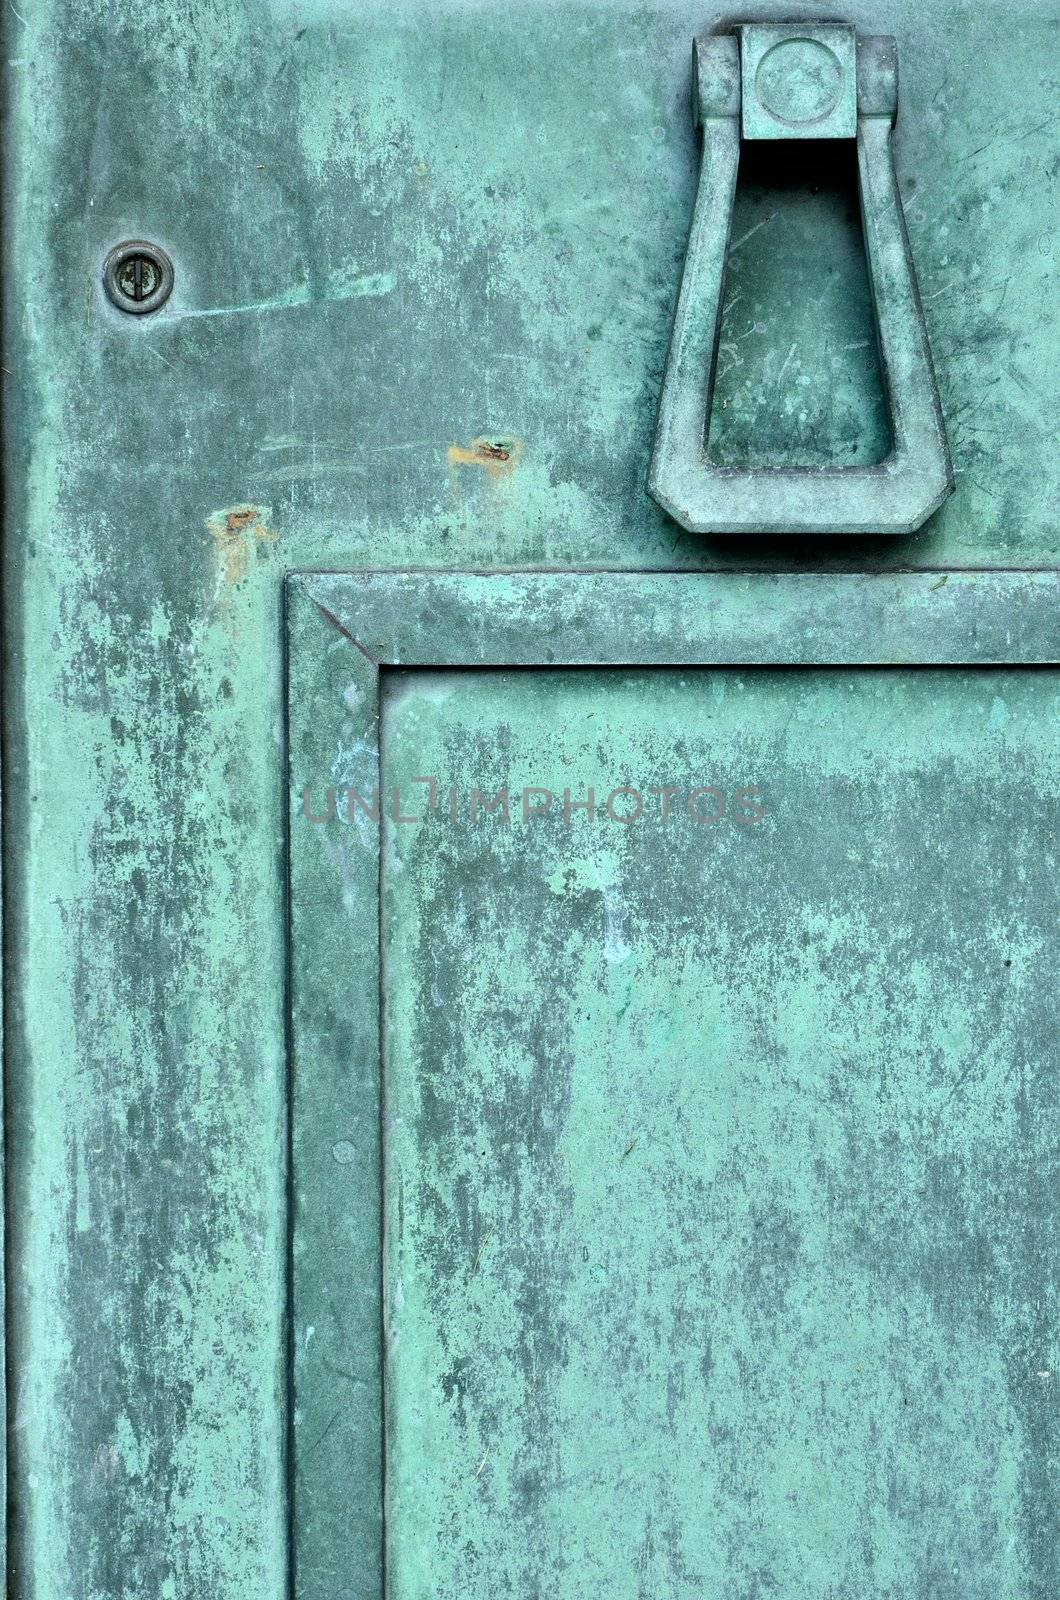 A section of a Tarnished Brass Mausoleum Door.